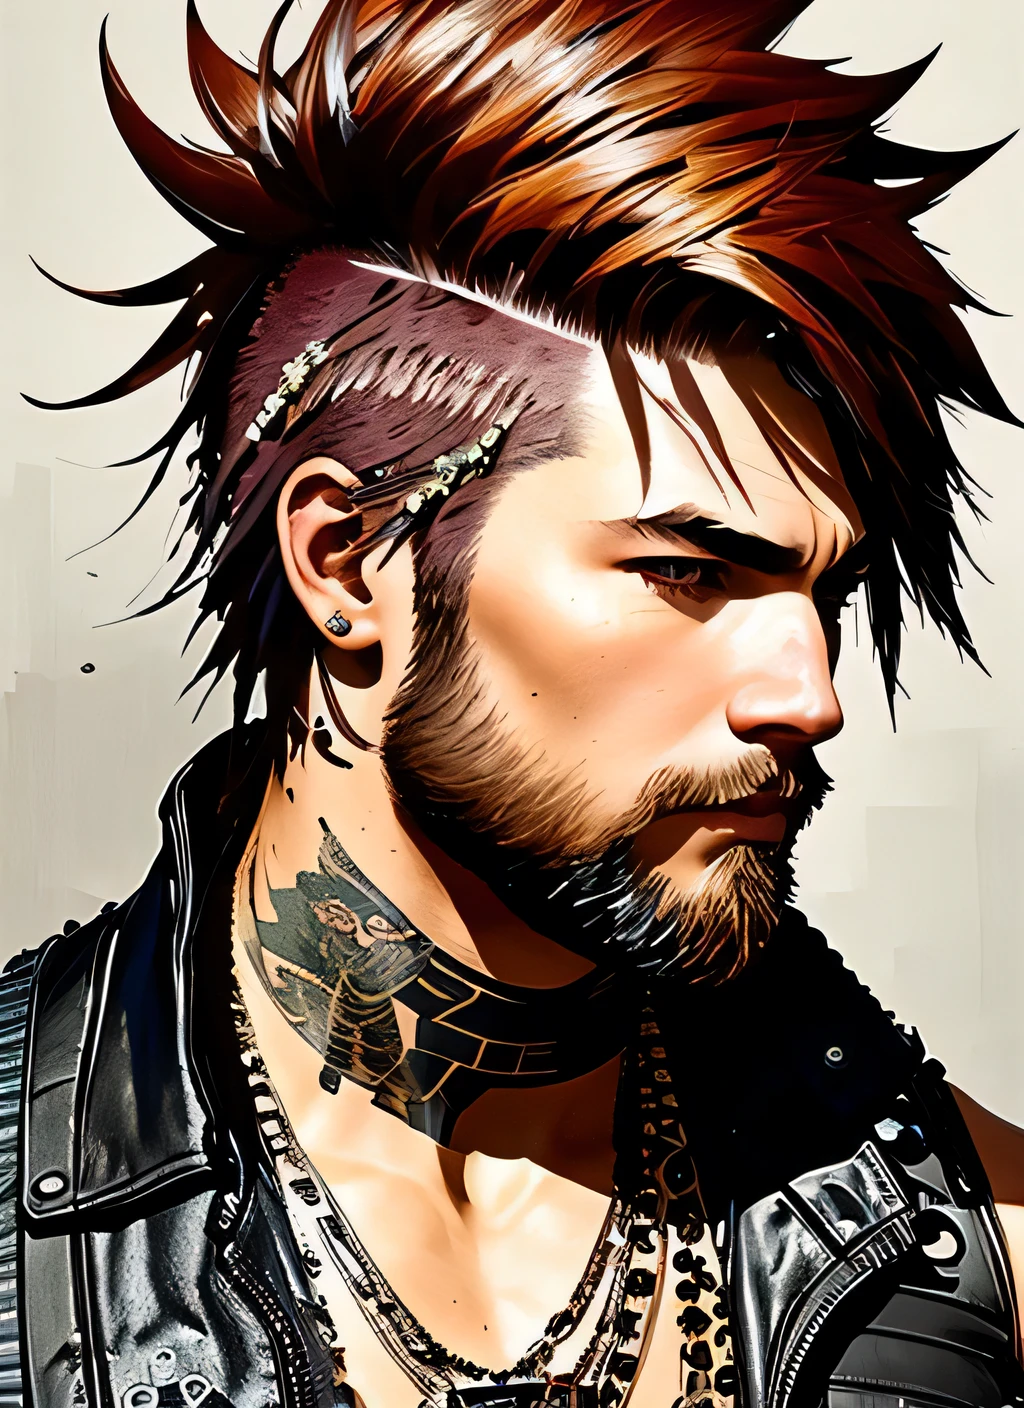 swpunk style,
A stunning intricate full color portrait of a grizzled man with a black faux hawk smiling,
wearing a black leather vest,
epic character composition,
thick strokes with paint splatters,
by ilya kuvshinov, alessio albi, nina masic,
sharp focus, natural lighting, subsurface scattering, f2, 35mm, film grain